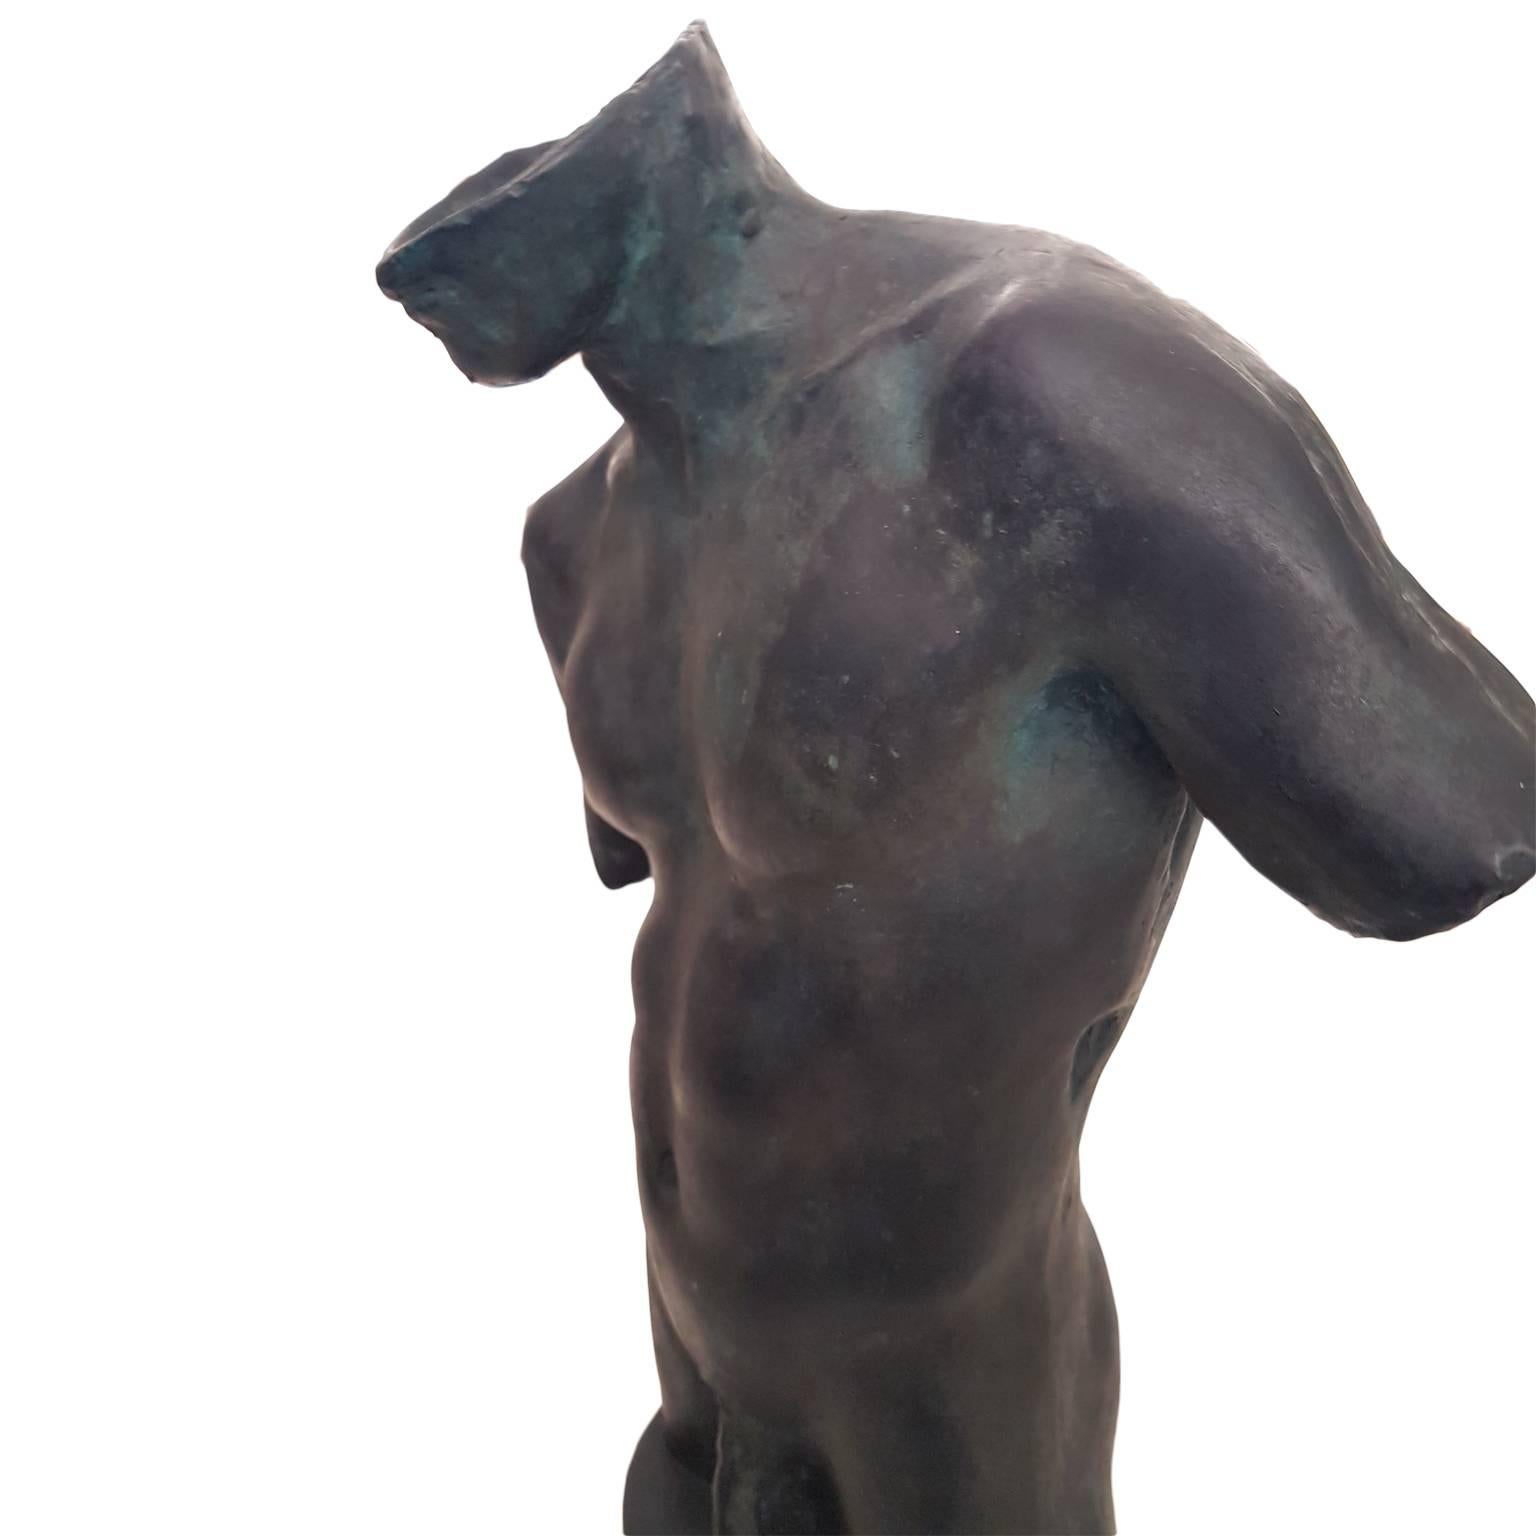 Amazing male bronze bust with a black patina. This work is the 6th from an edition of eight.
Its creator, Igor Mitoraj, is a polish sculptor deeply rooted in the classical tradition.
He sculpts broken or severed fragments of the male form, with an